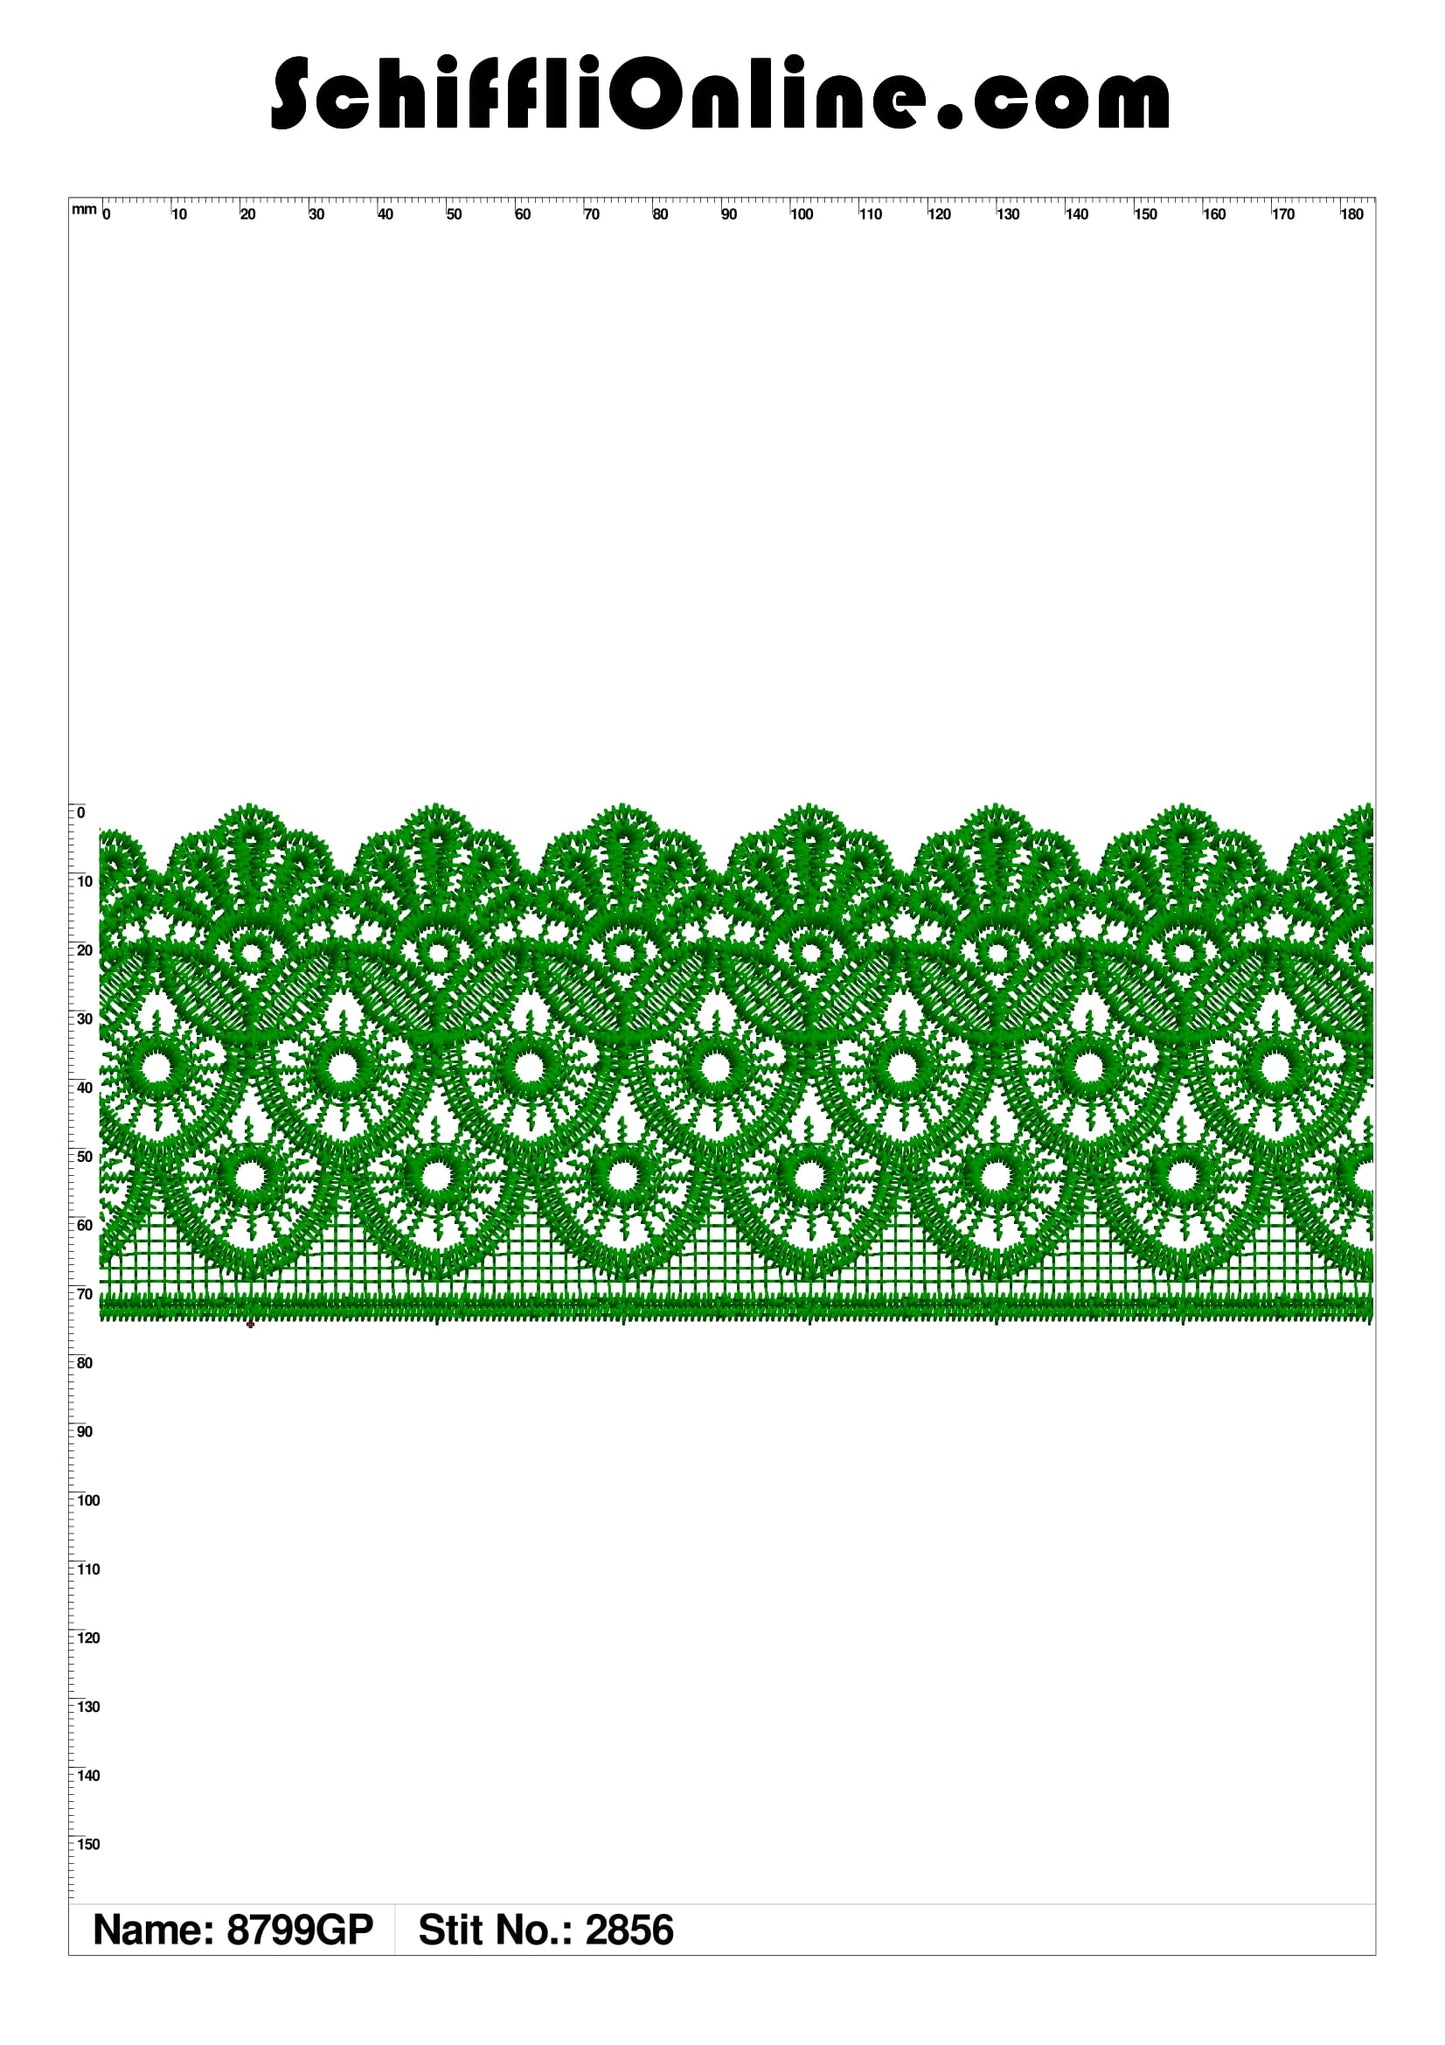 Book 084 CHEMICAL LACE 4X4 50 DESIGNS